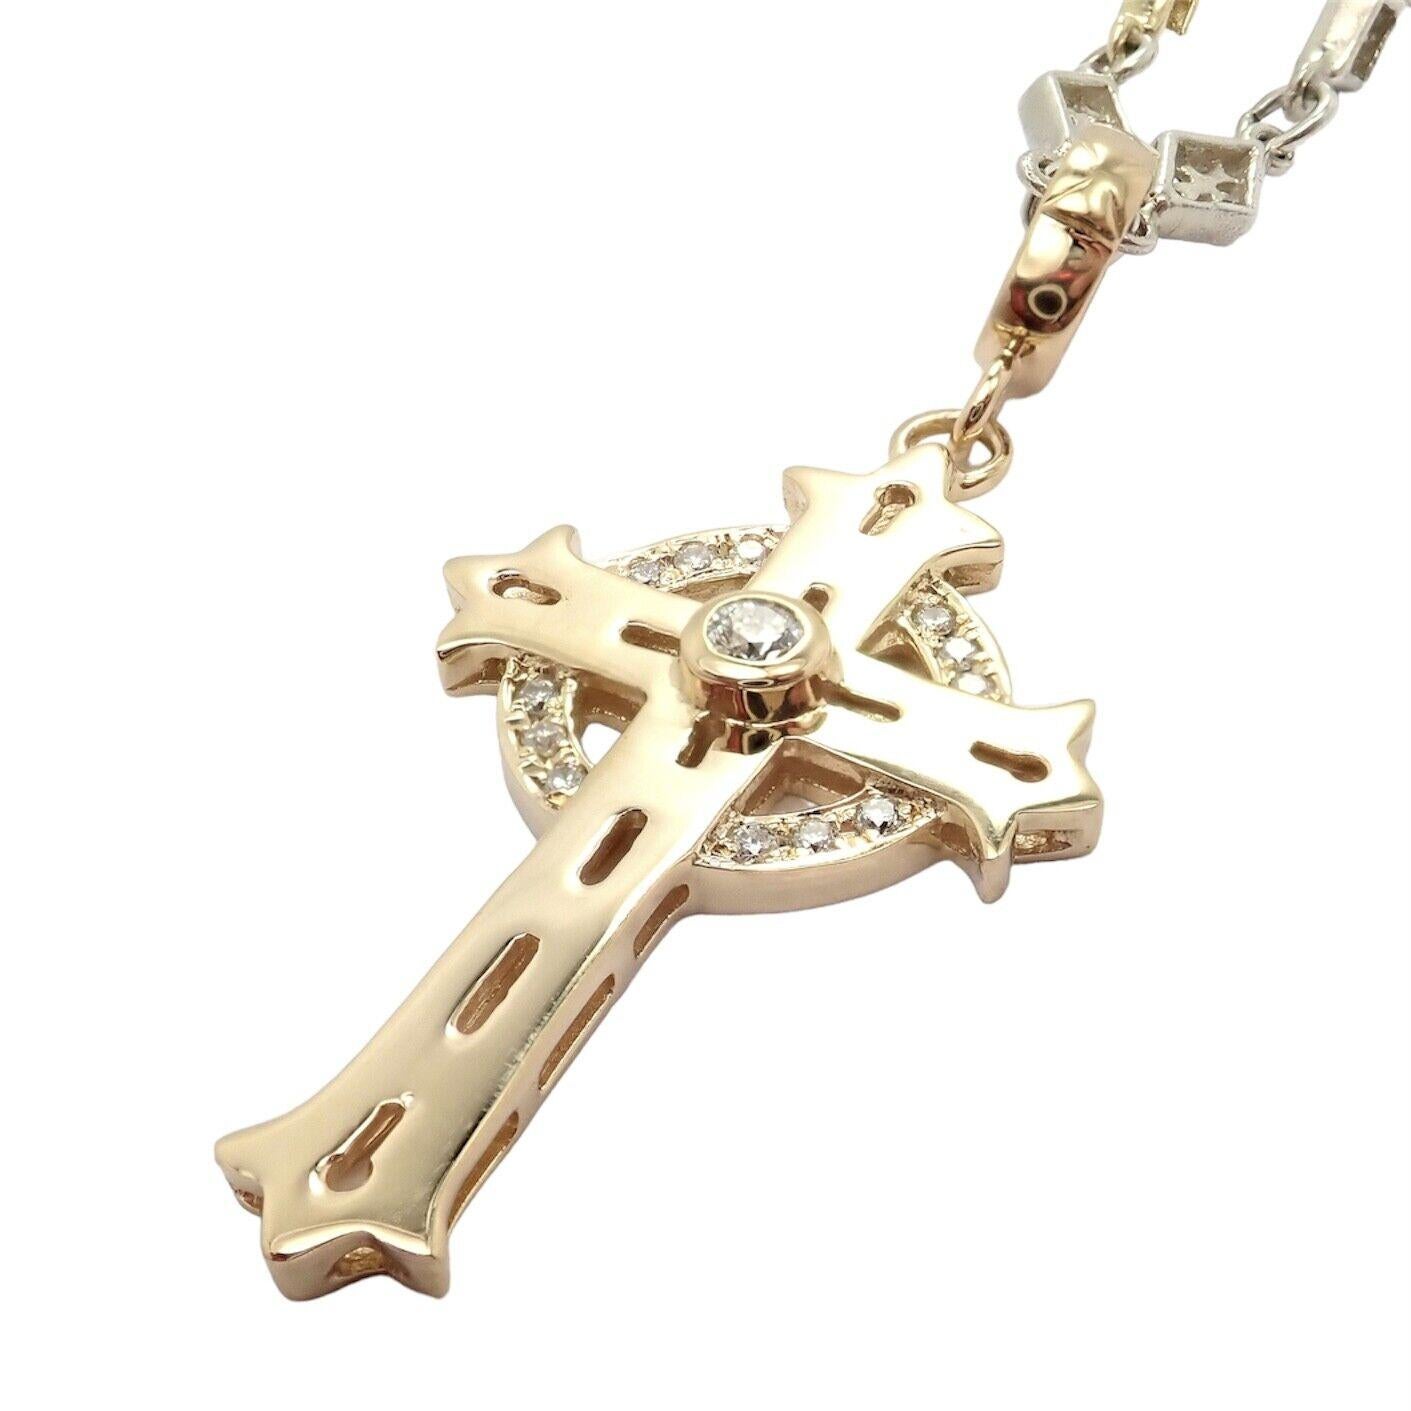 18k Yellow Gold And Silver Diamond Cross Pendant Chain Necklace by Loree Rodkin. 
With 13 round diamonds VVS1 clarity G color total weight 0.21ct
Details: 
Chain: 18k Yellow gold And Sterling Silver
Pendant: 18k Yellow Gold
Weight: 19.4 grams
Chain: